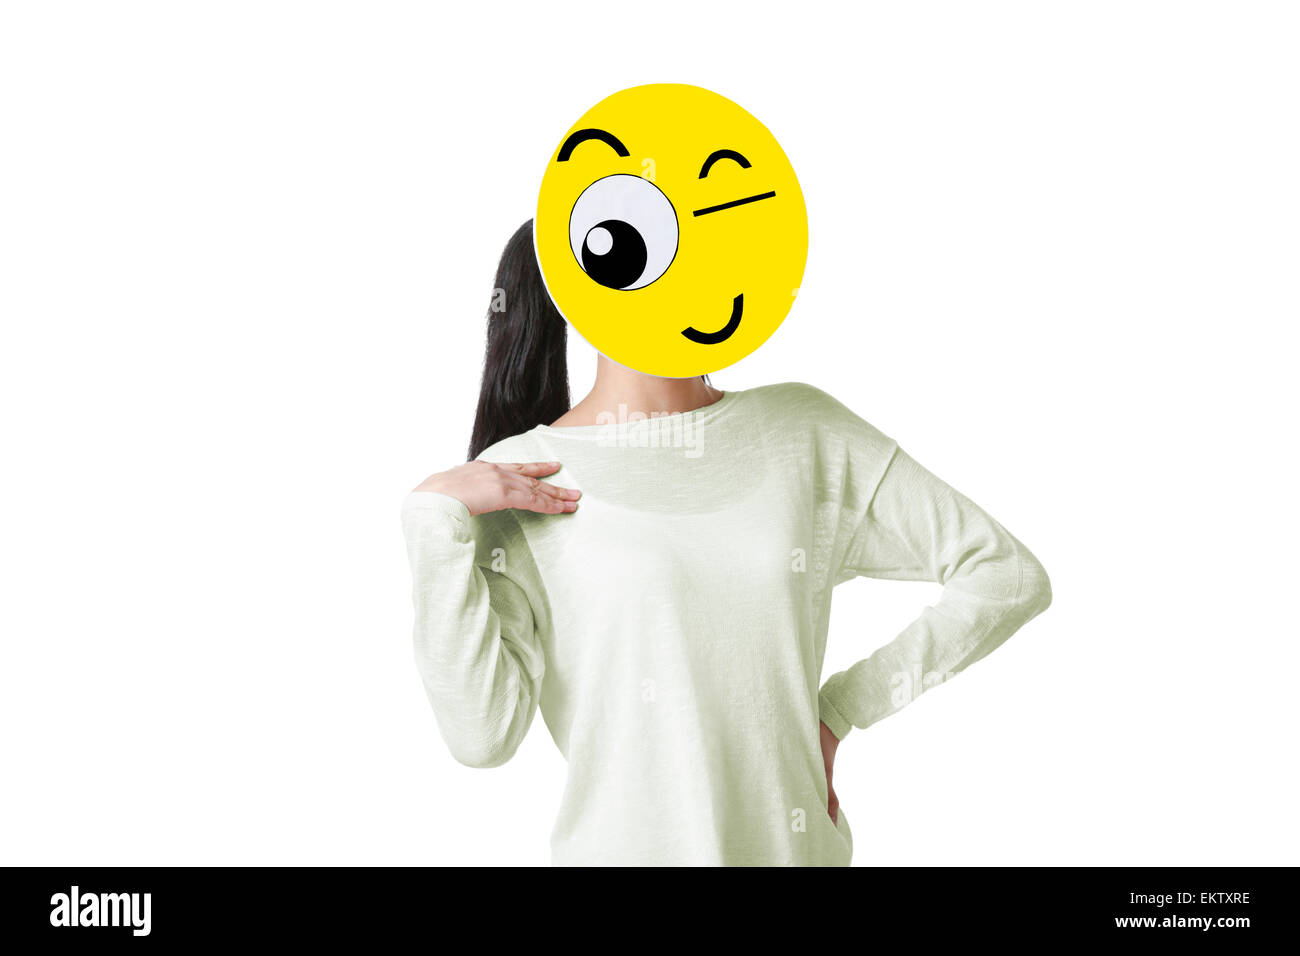 Young woman with a winking emoticon face in front of her face Stock Photo